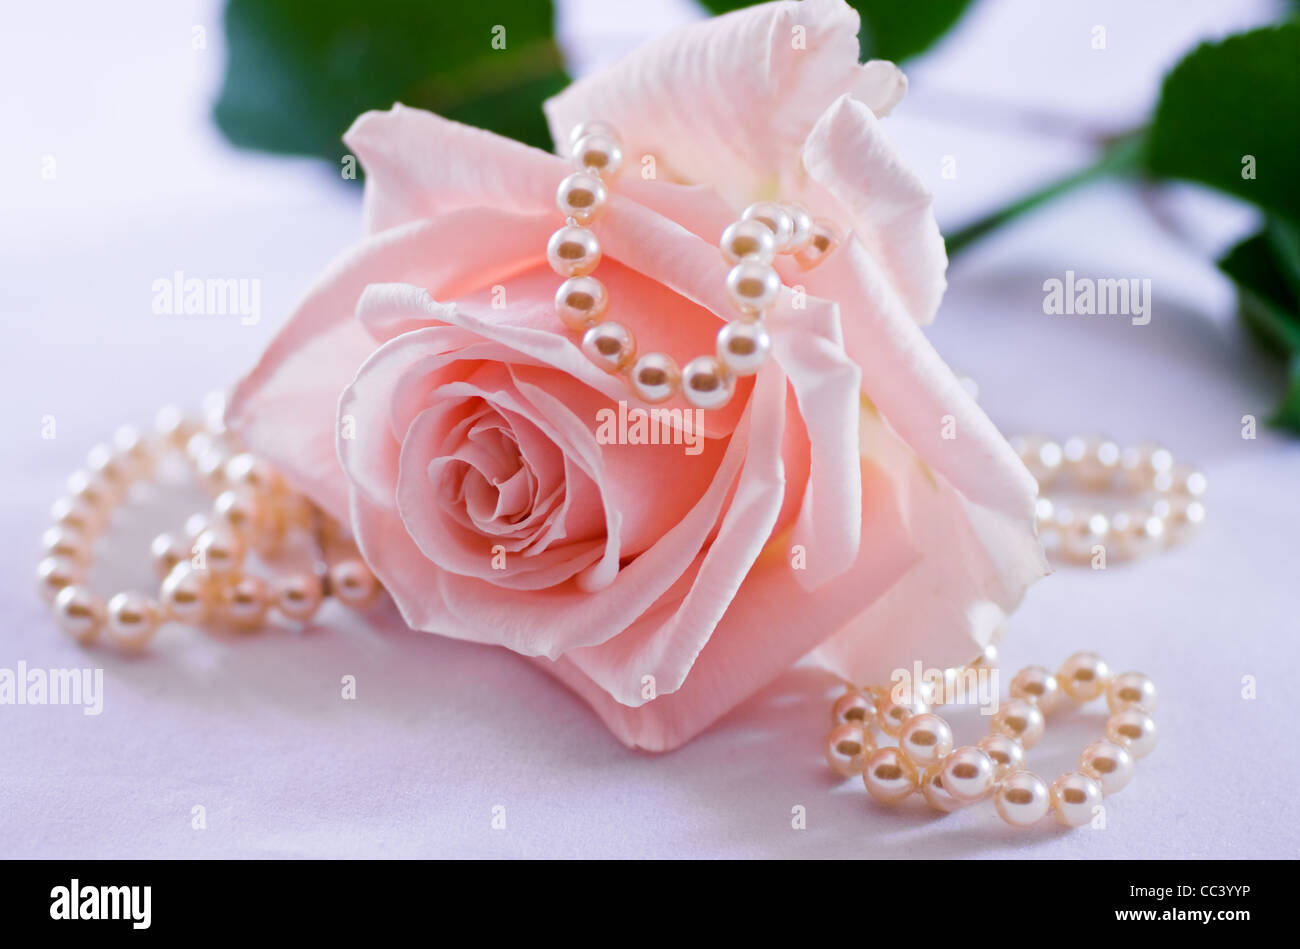 Soft pink rose with a pearl necklace Stock Photo